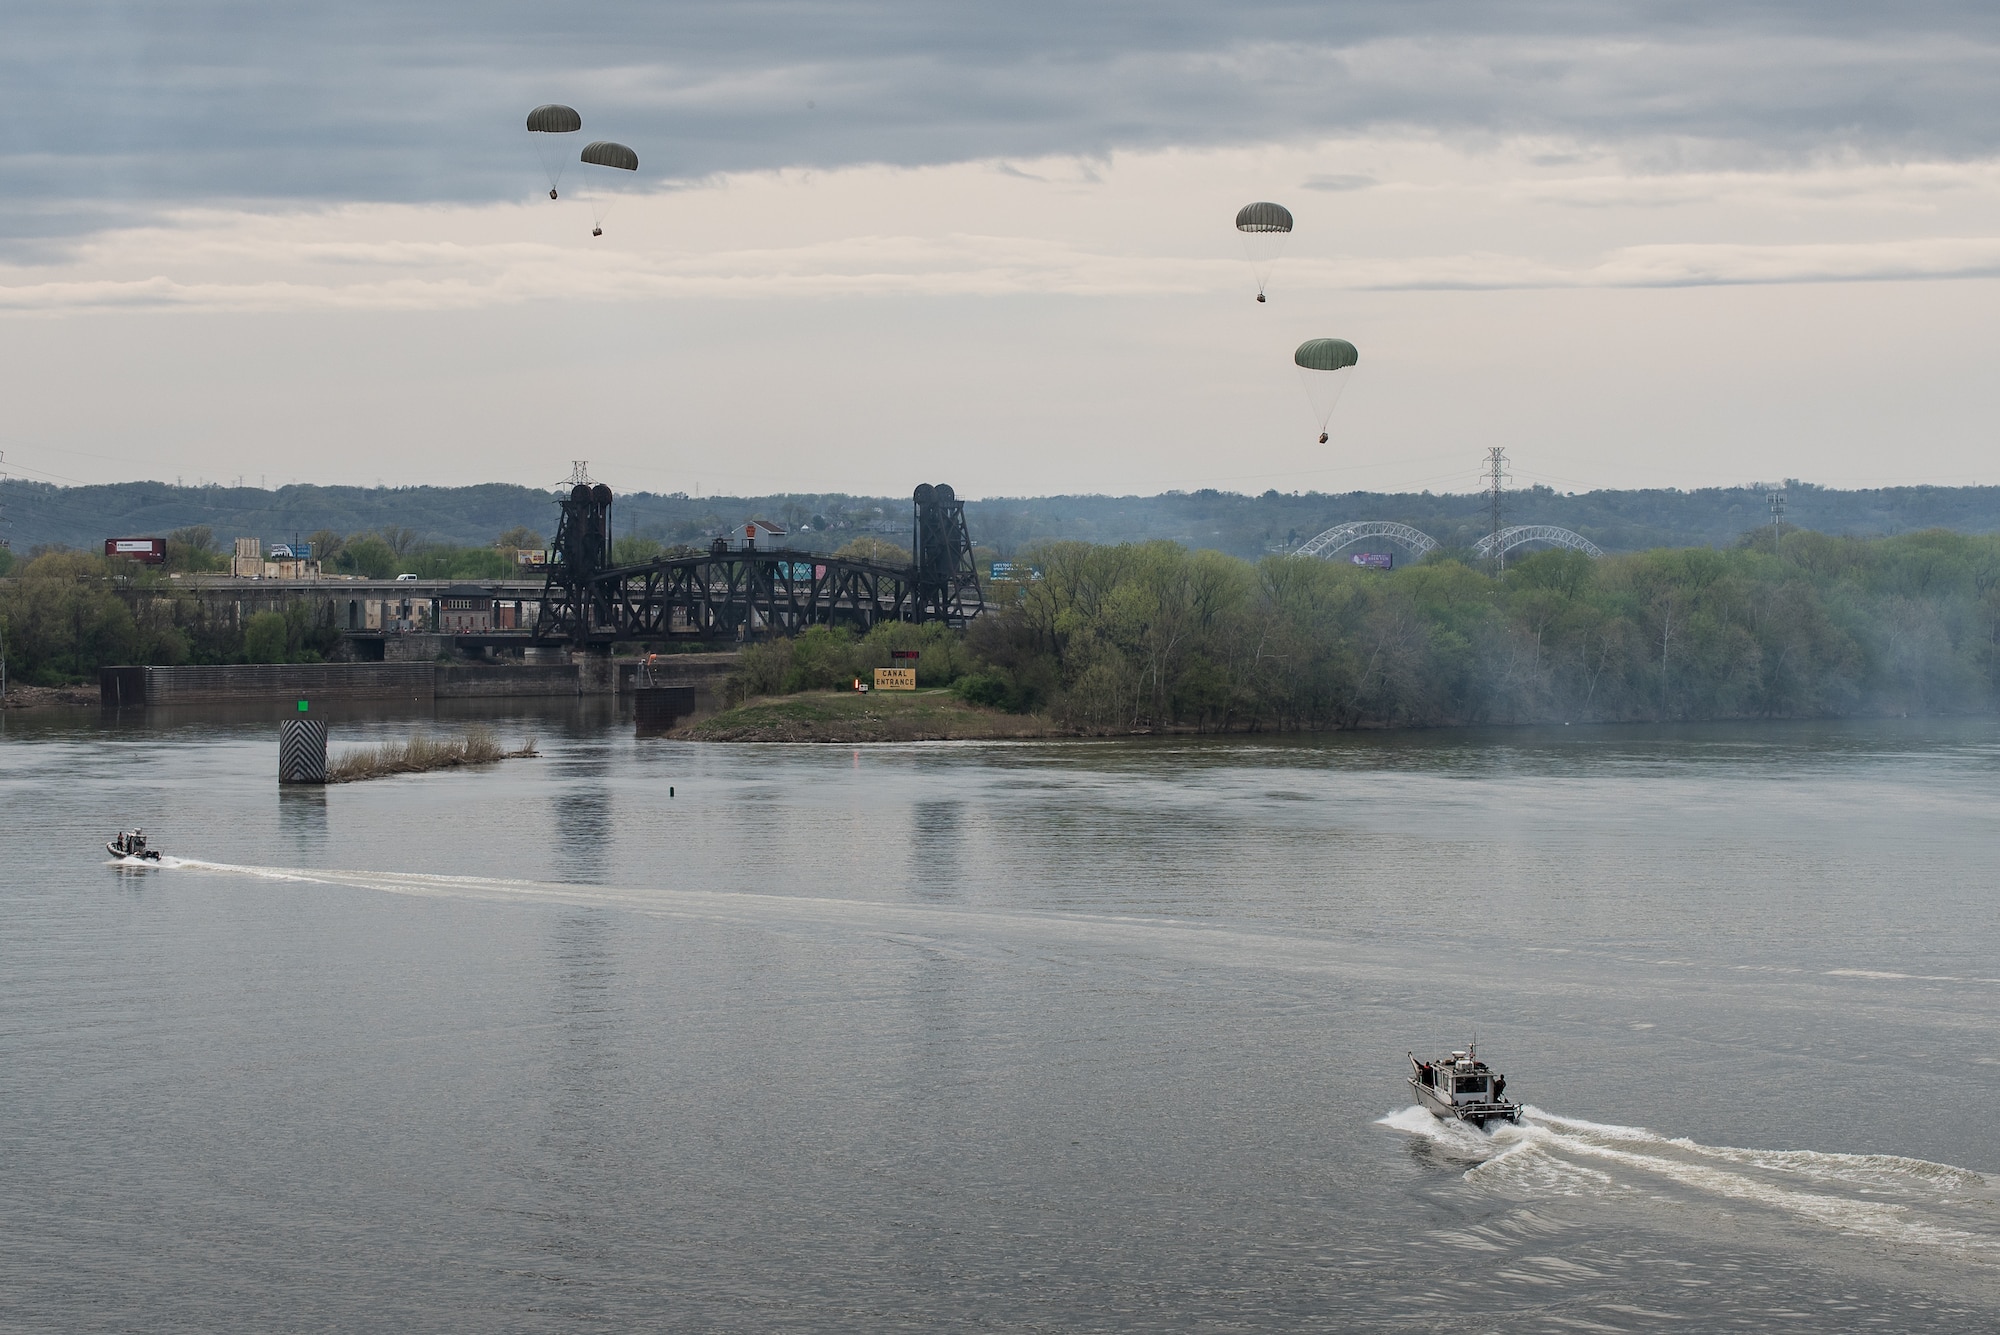 Recovery teams from the Kentucky Air National Guard prepare to retrieve cargo bundles from the Ohio River after an air-drop demonstration as part of the Thunder Over Louisville airshow in Louisville, Ky., April 13, 2019. Hundreds of thousands of spectators turned out to view the annual event, which has grown to become one of the largest single-day air shows in North America. (U.S. Air National Guard photo by Dale Greer)